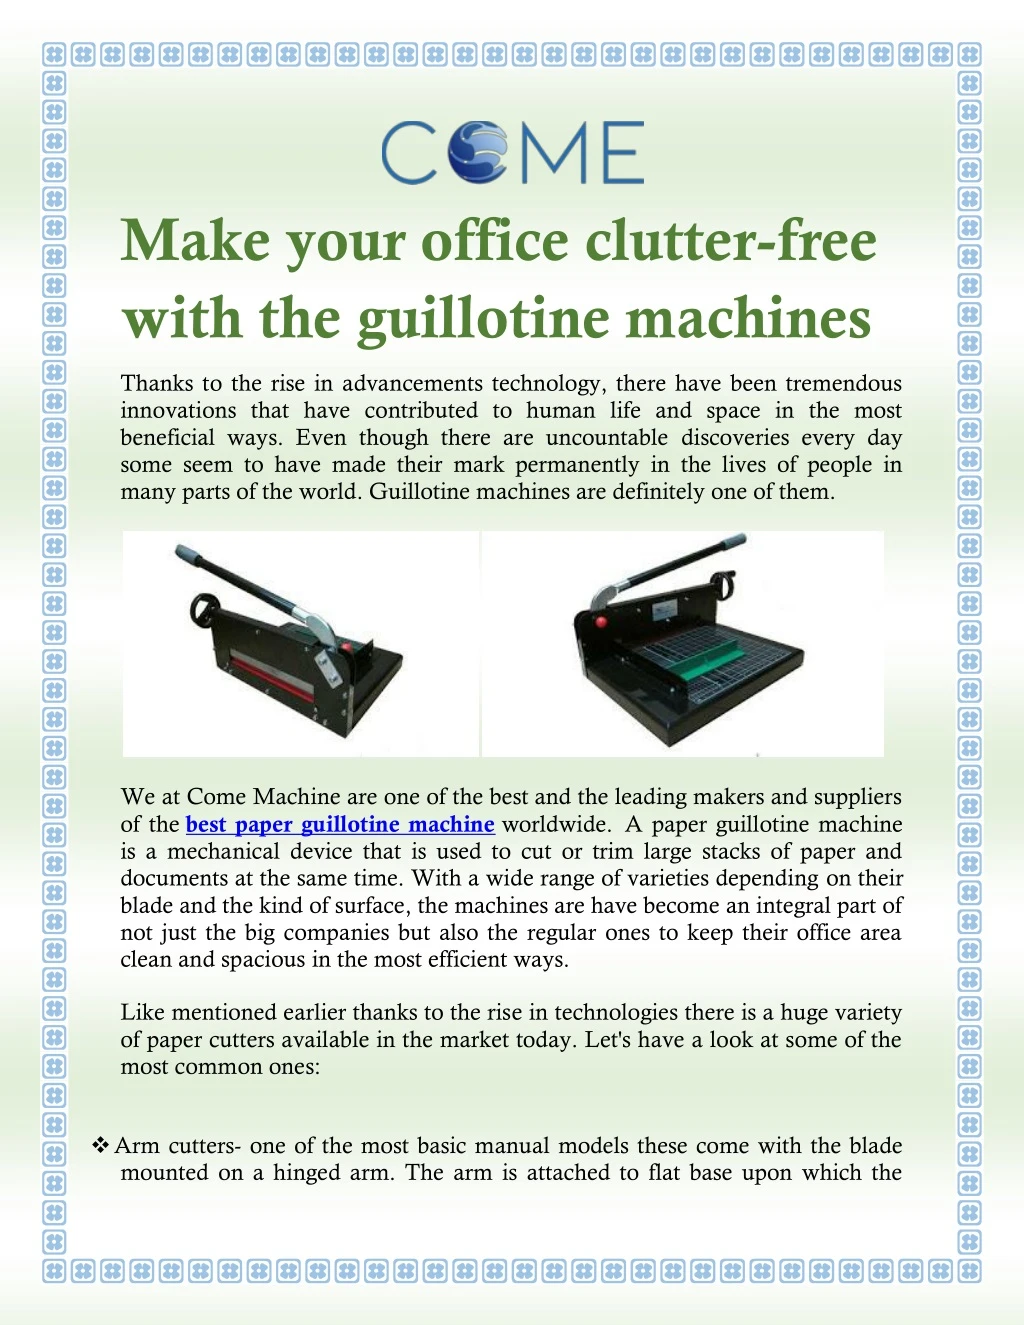 make your office clutter free with the guillotine